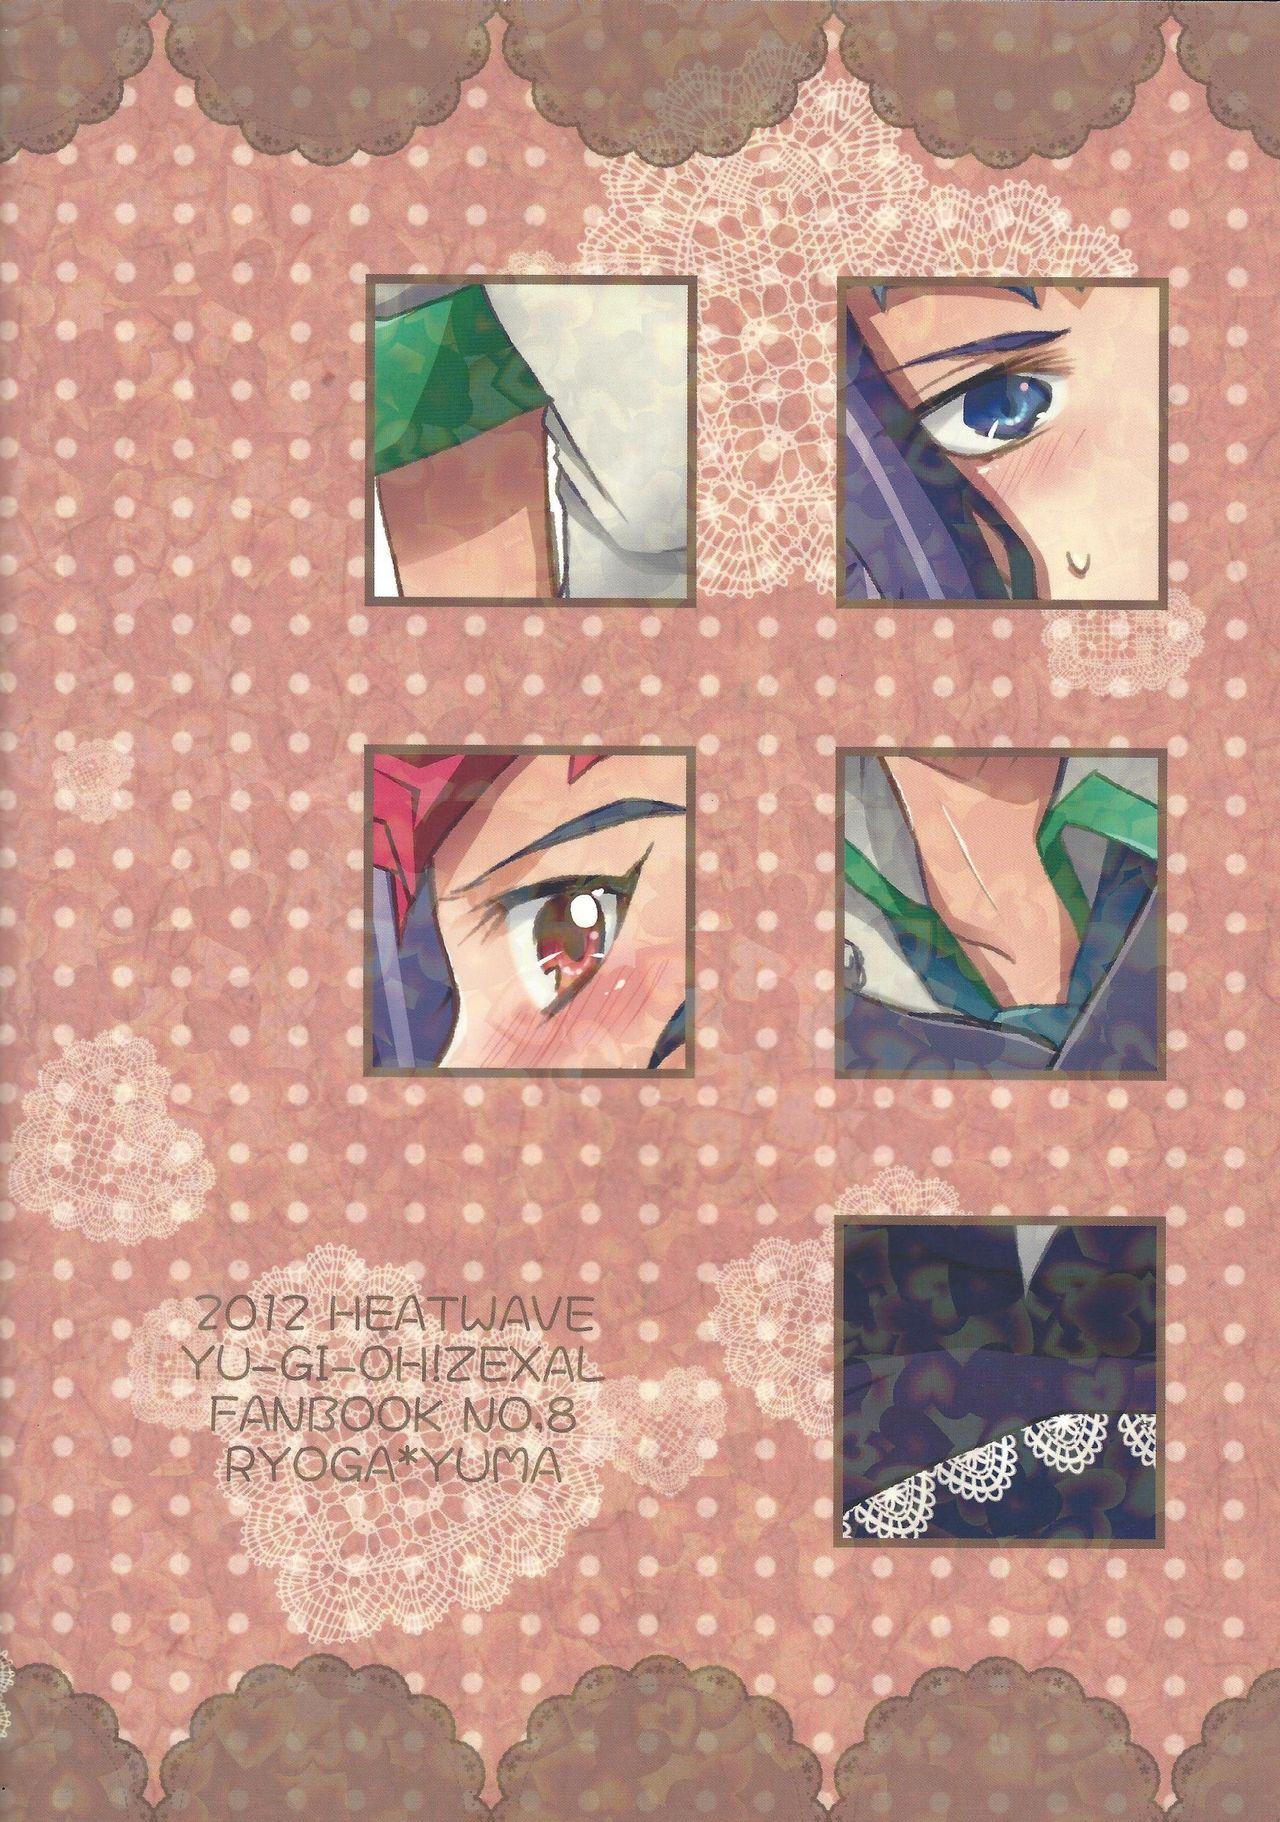 Smalltits Maple Syrup - Yu-gi-oh zexal Her - Page 28